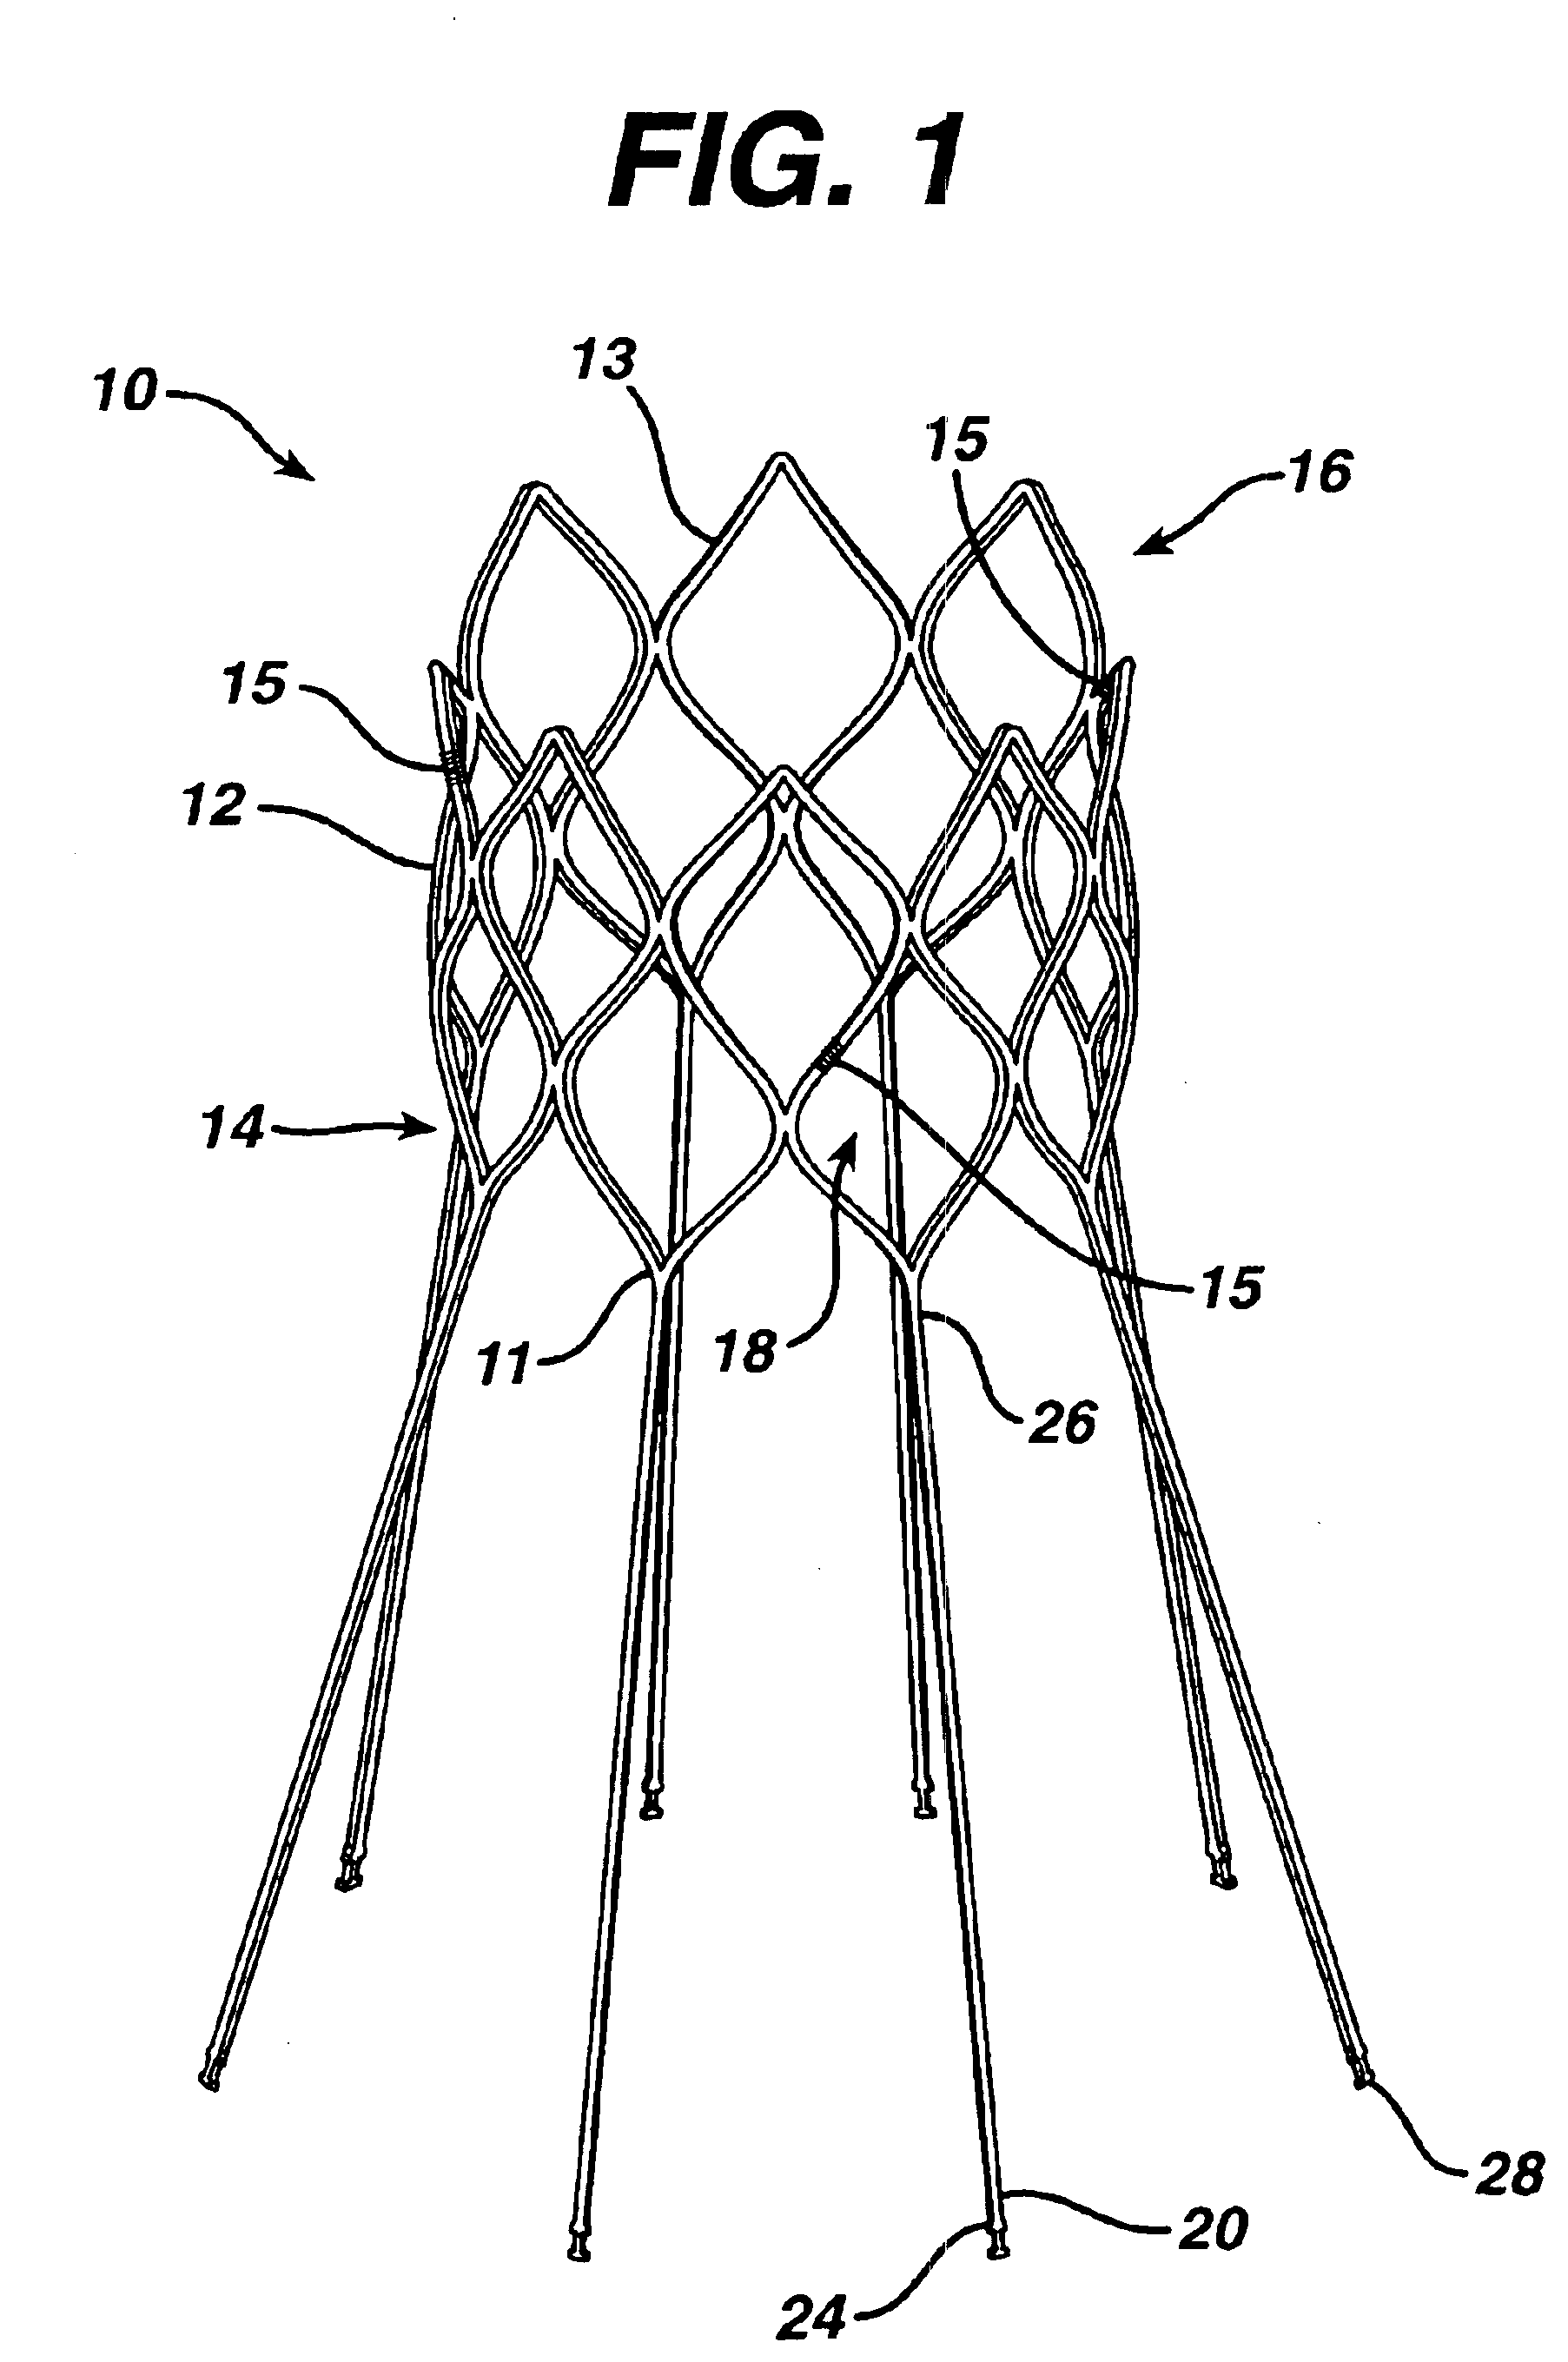 Delivery apparatus for a self expanding retractable stent